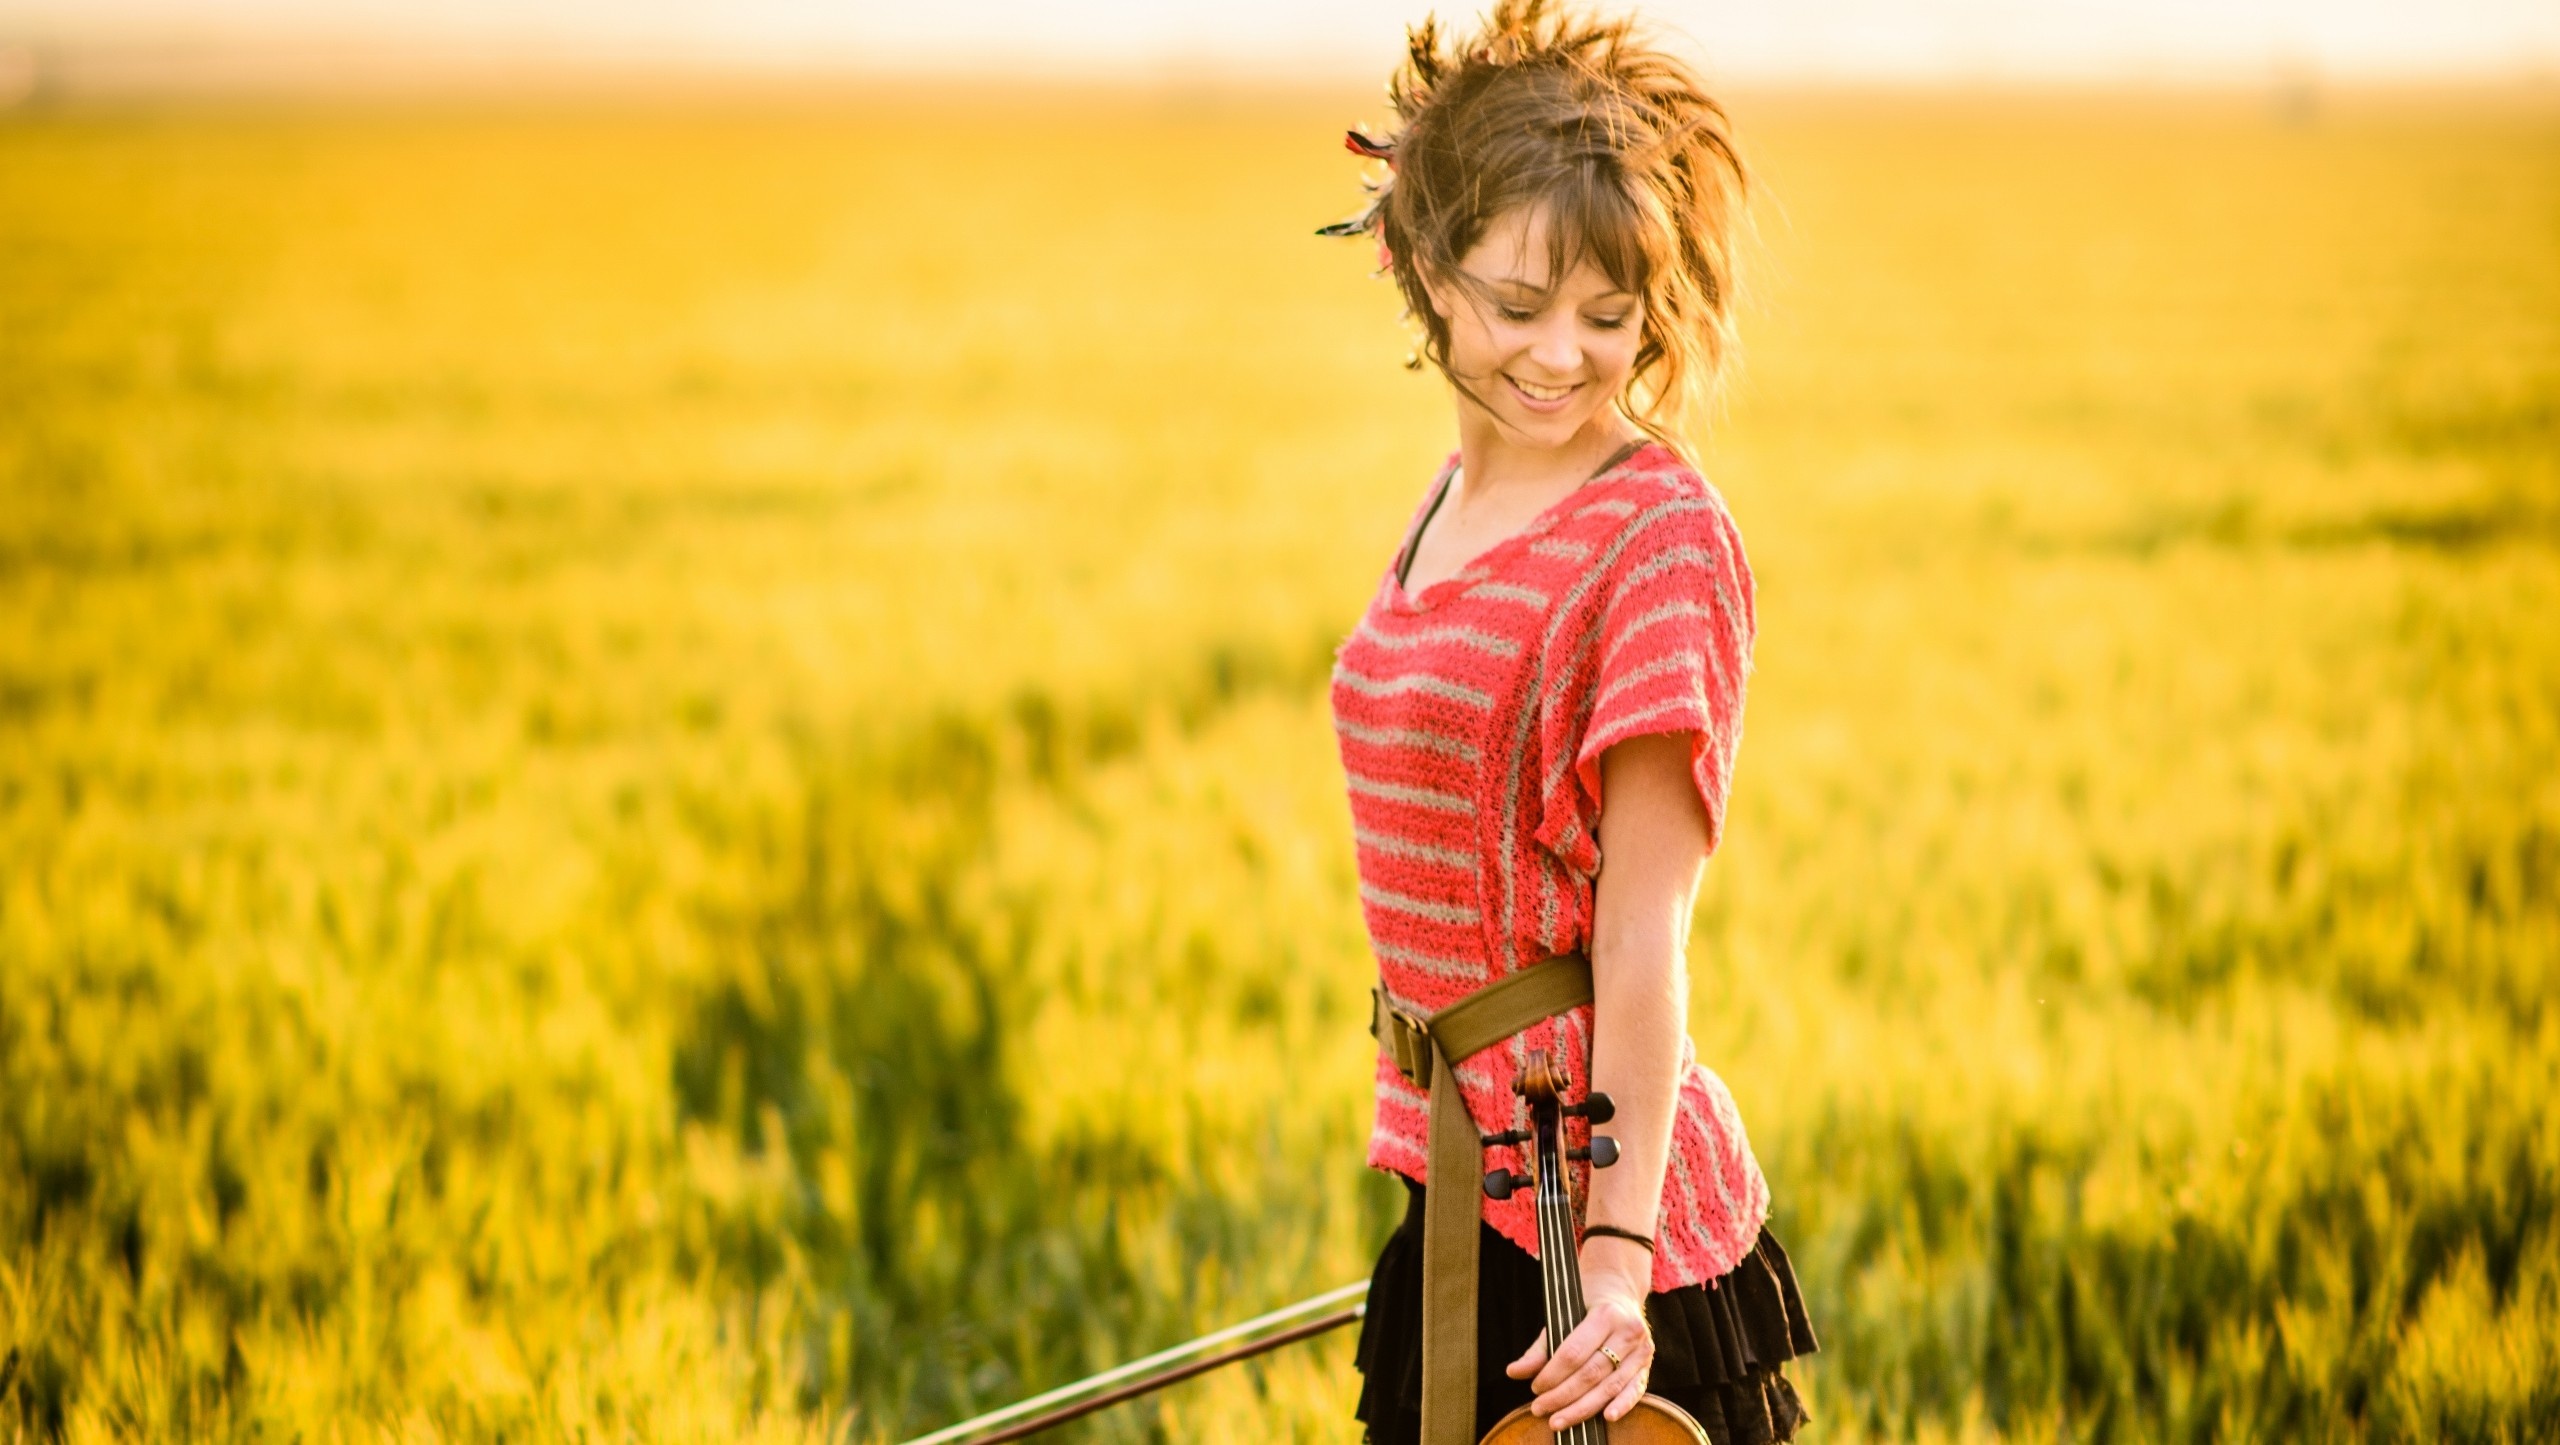 Lindsey Stirling, Striking outdoor photos, Talented musician, Captivating imagery, 2560x1450 HD Desktop